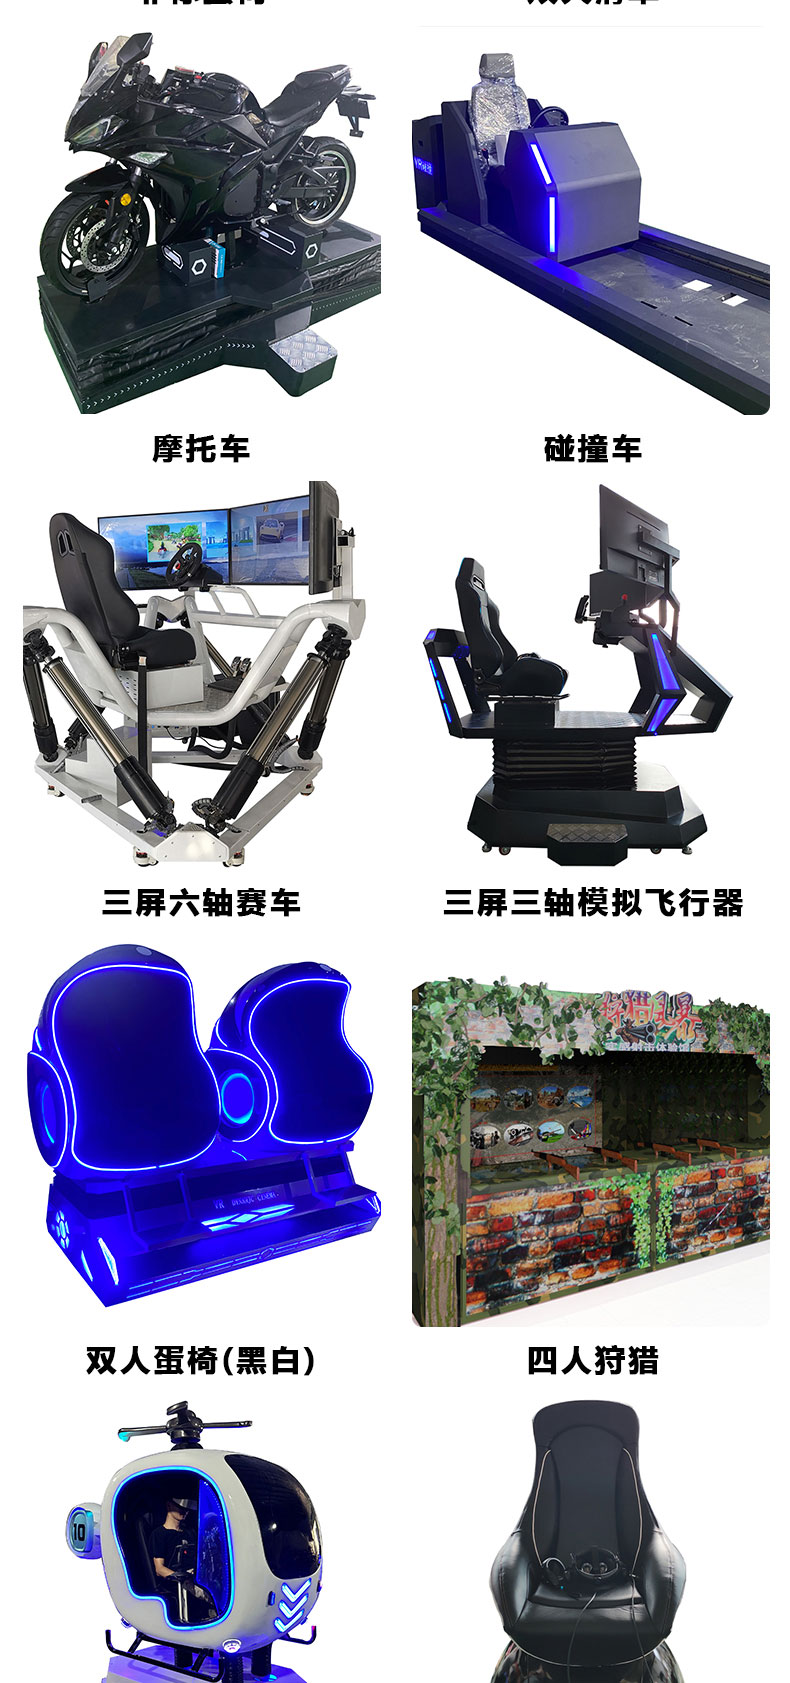 Full supply of single/double 360 rotating equipment, large rotating body feeling seat equipment, Chuangying